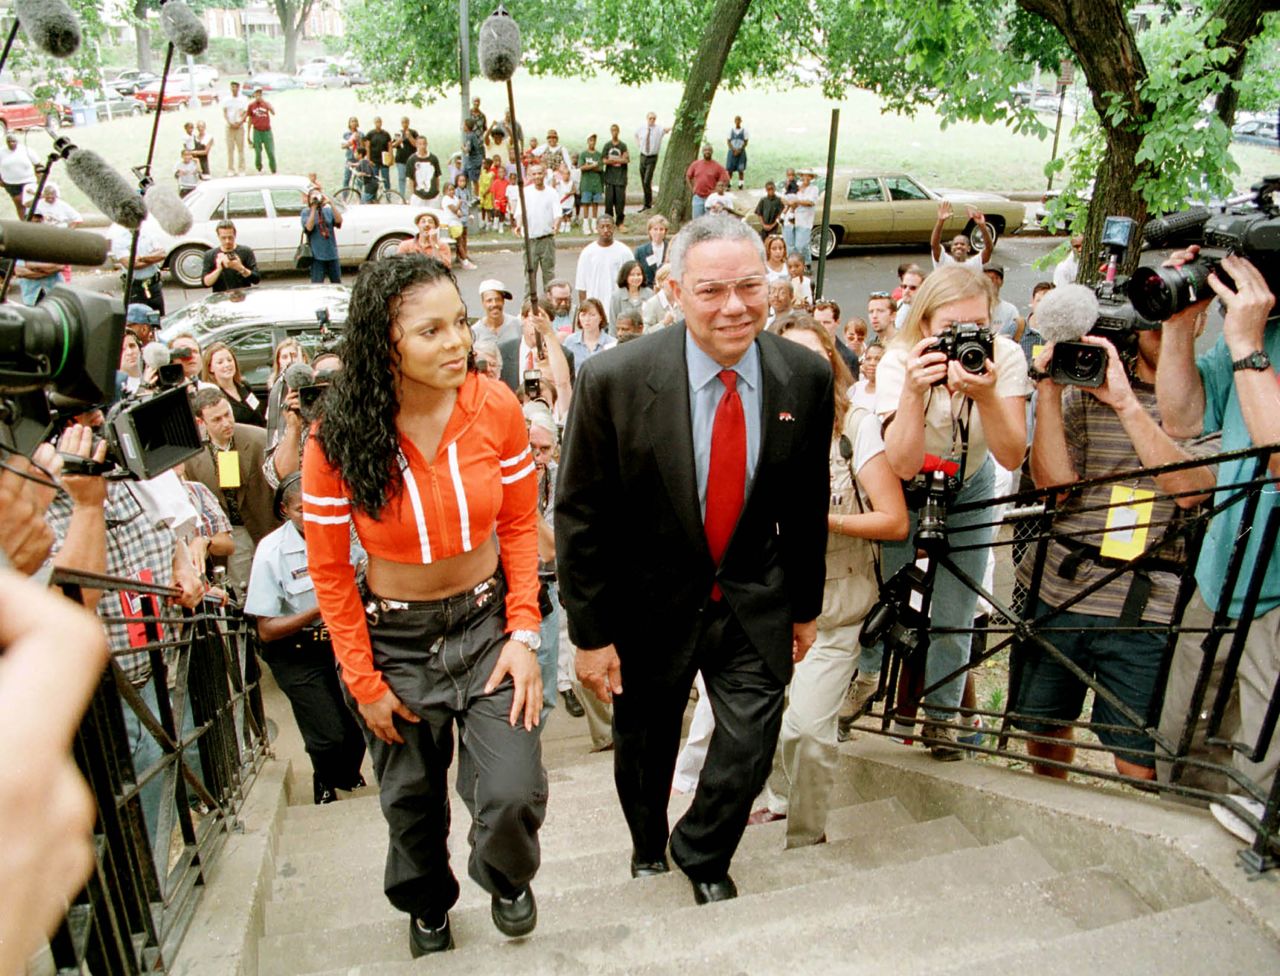 Colin Powell and Janet Jackson visit an at-risk neighborhood in Washington, D.C. to promote the organization "America's Promise" on July 7, 1998. Powell, the former Secretary of State, died in October 2021 at age 84. 